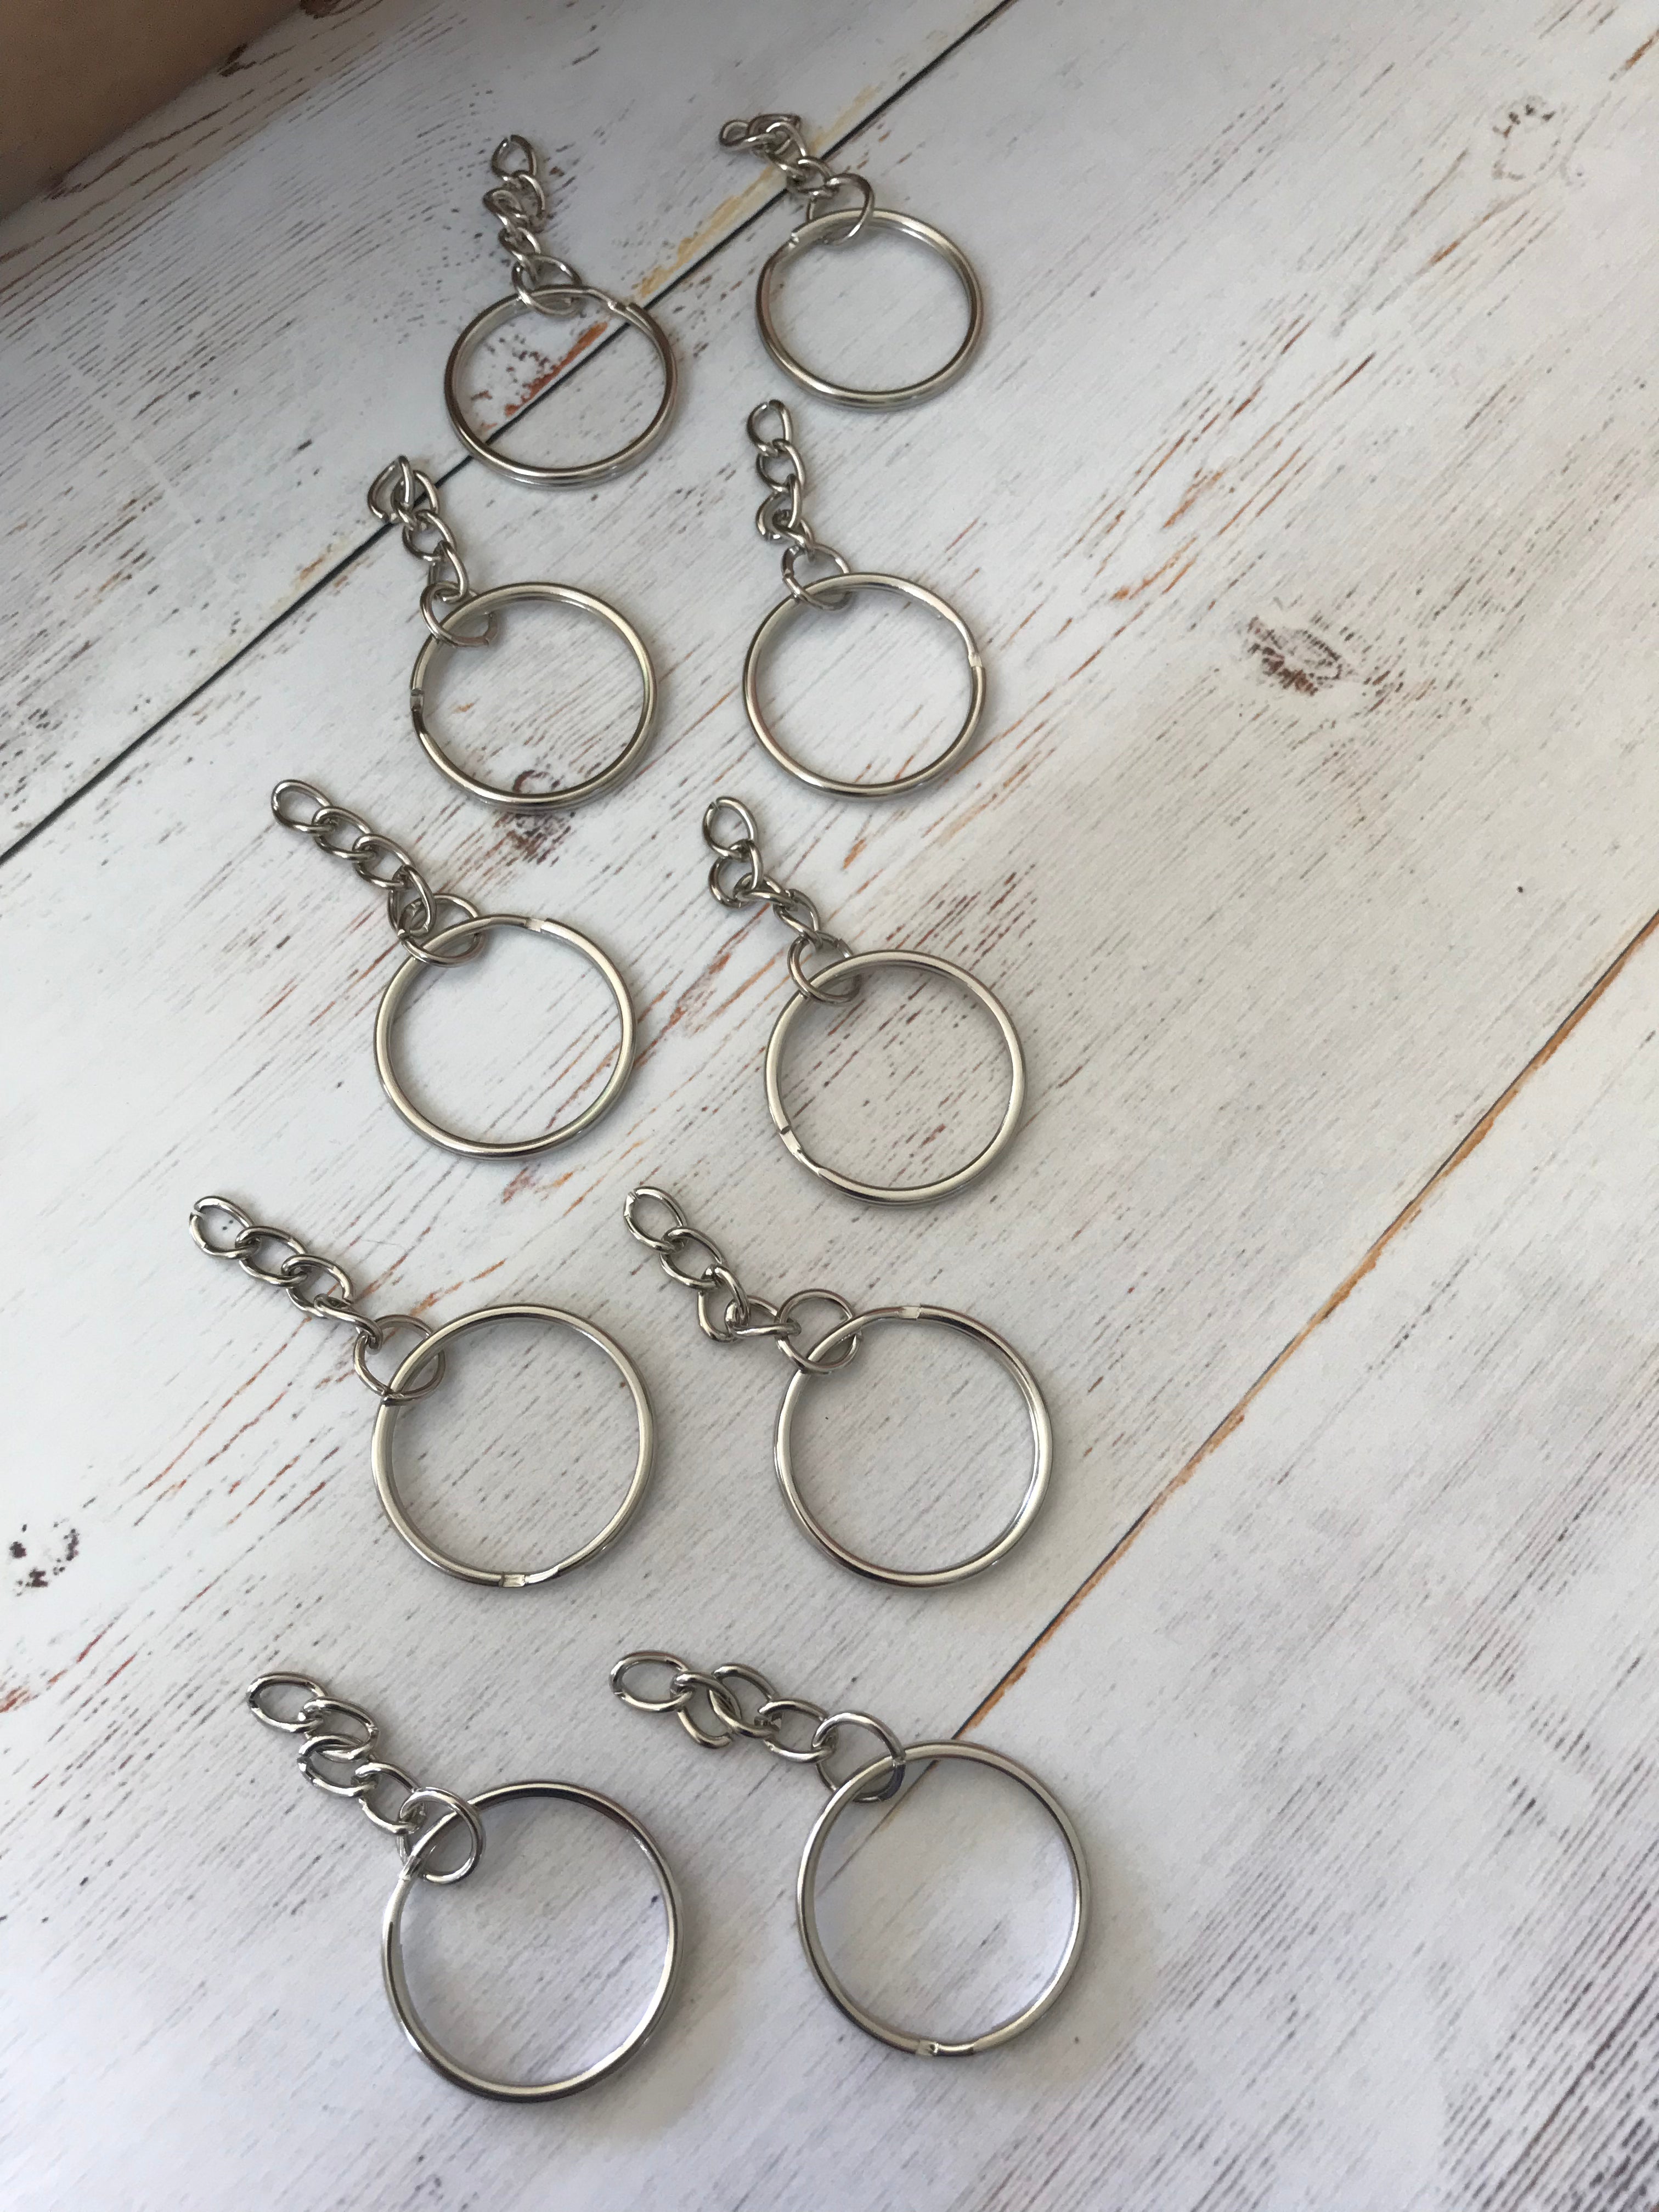 Iron Split Key Rings, Platinum with Keychain (10 in a bag)